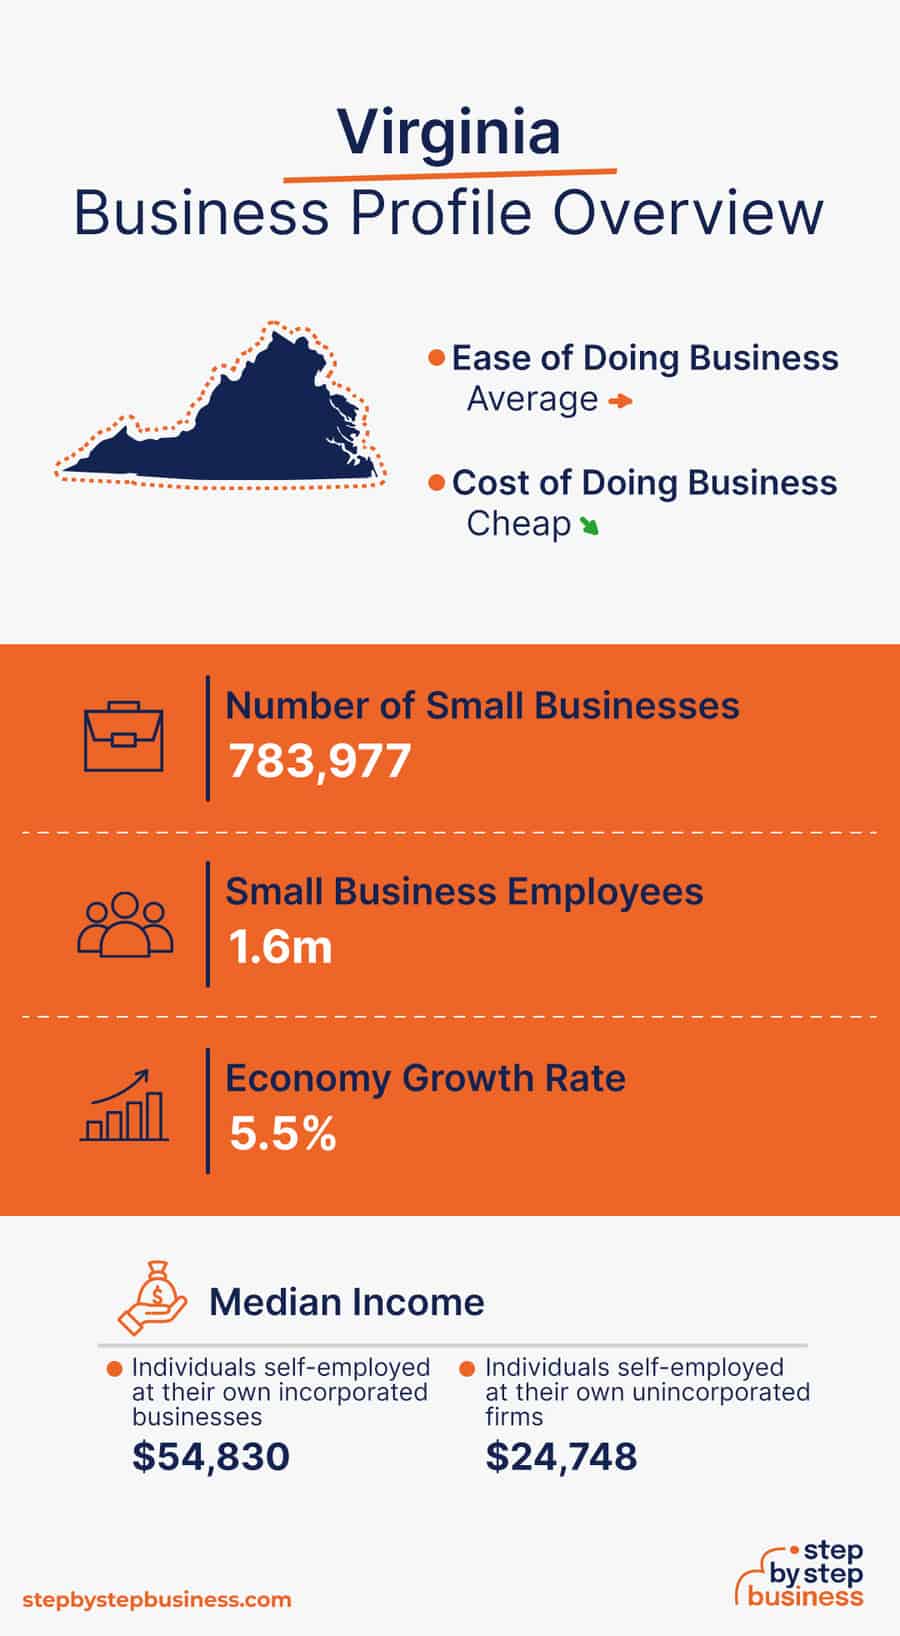 Virginia Business Profile Overview